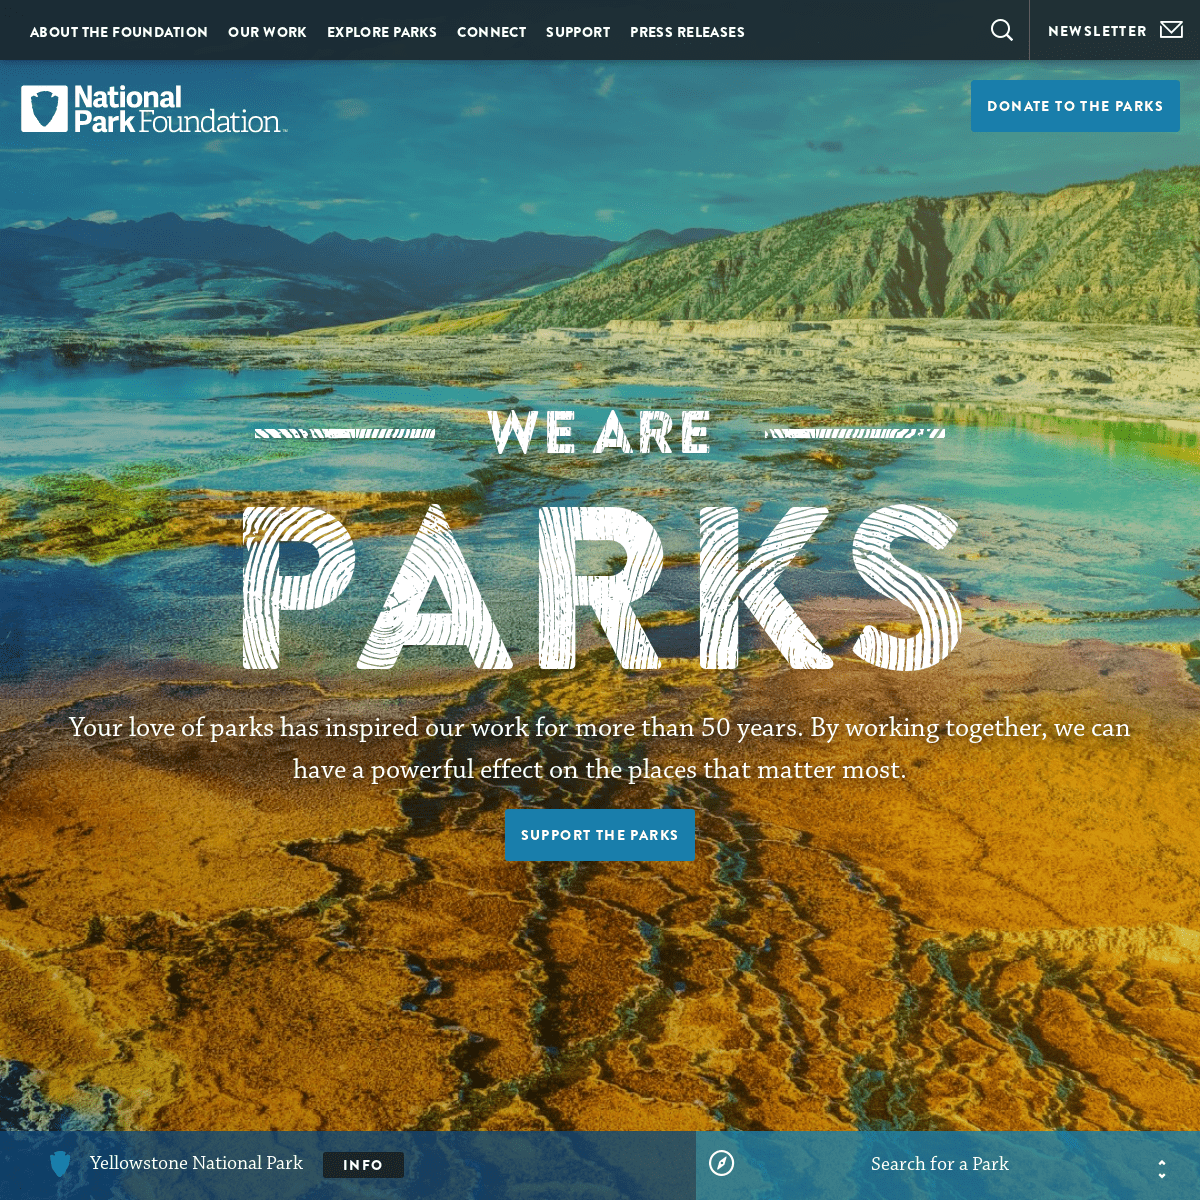 National Park Foundation | The Official Charitable Partner of the National Park Service